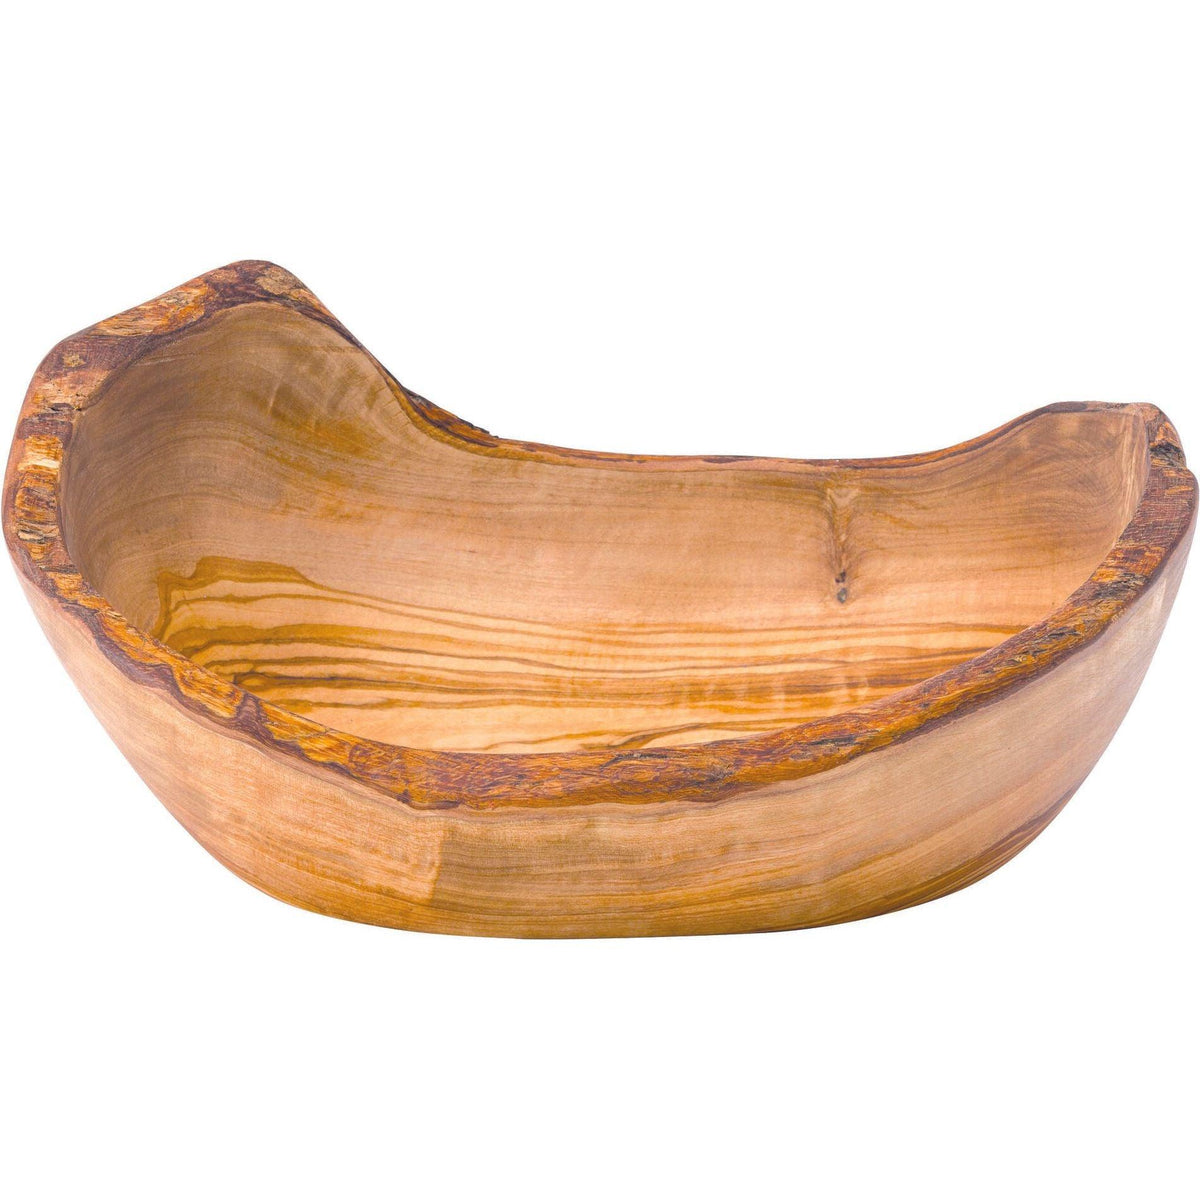 Rustic Olive Oval Serving Bowls And Platters - BESPOKE77